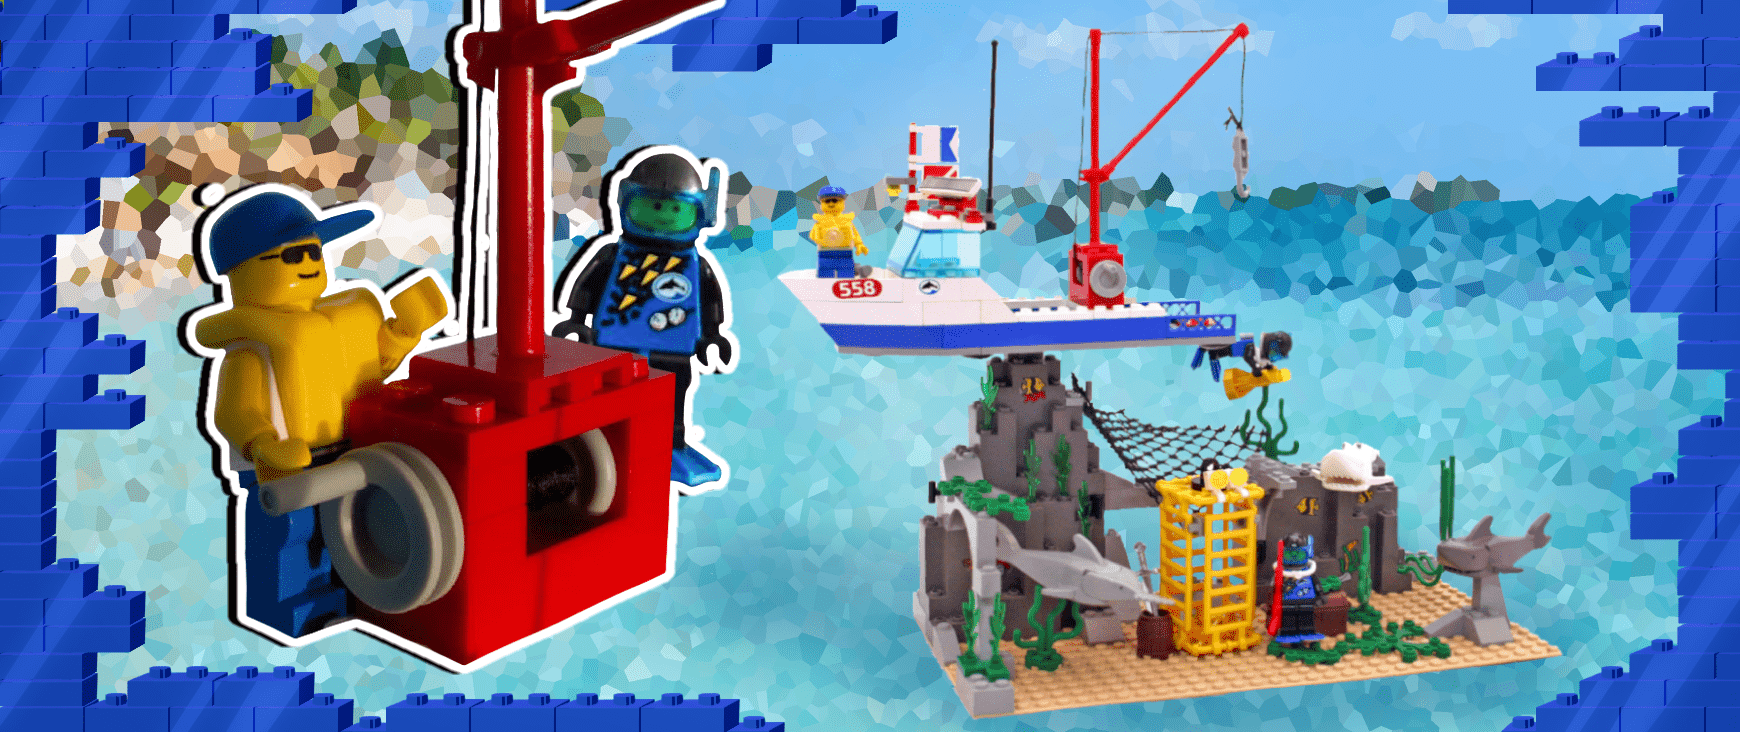 Shark Cage Cove Lego set from 1997